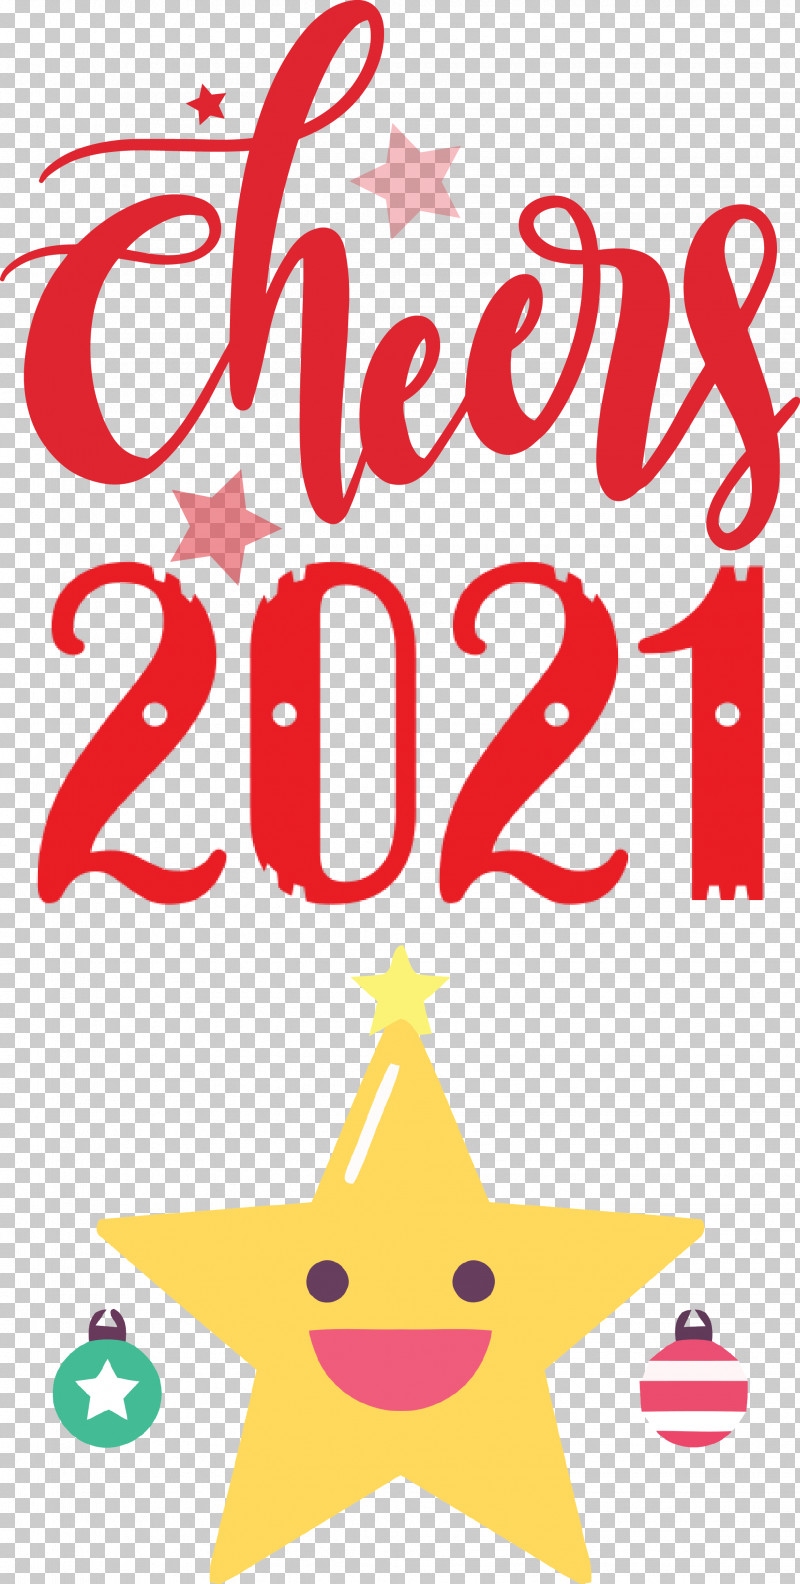 Cheers 2021 New Year Cheers.2021 New Year PNG, Clipart, Cheers 2021 New Year, Editing, Free, Svgedit, Text Free PNG Download